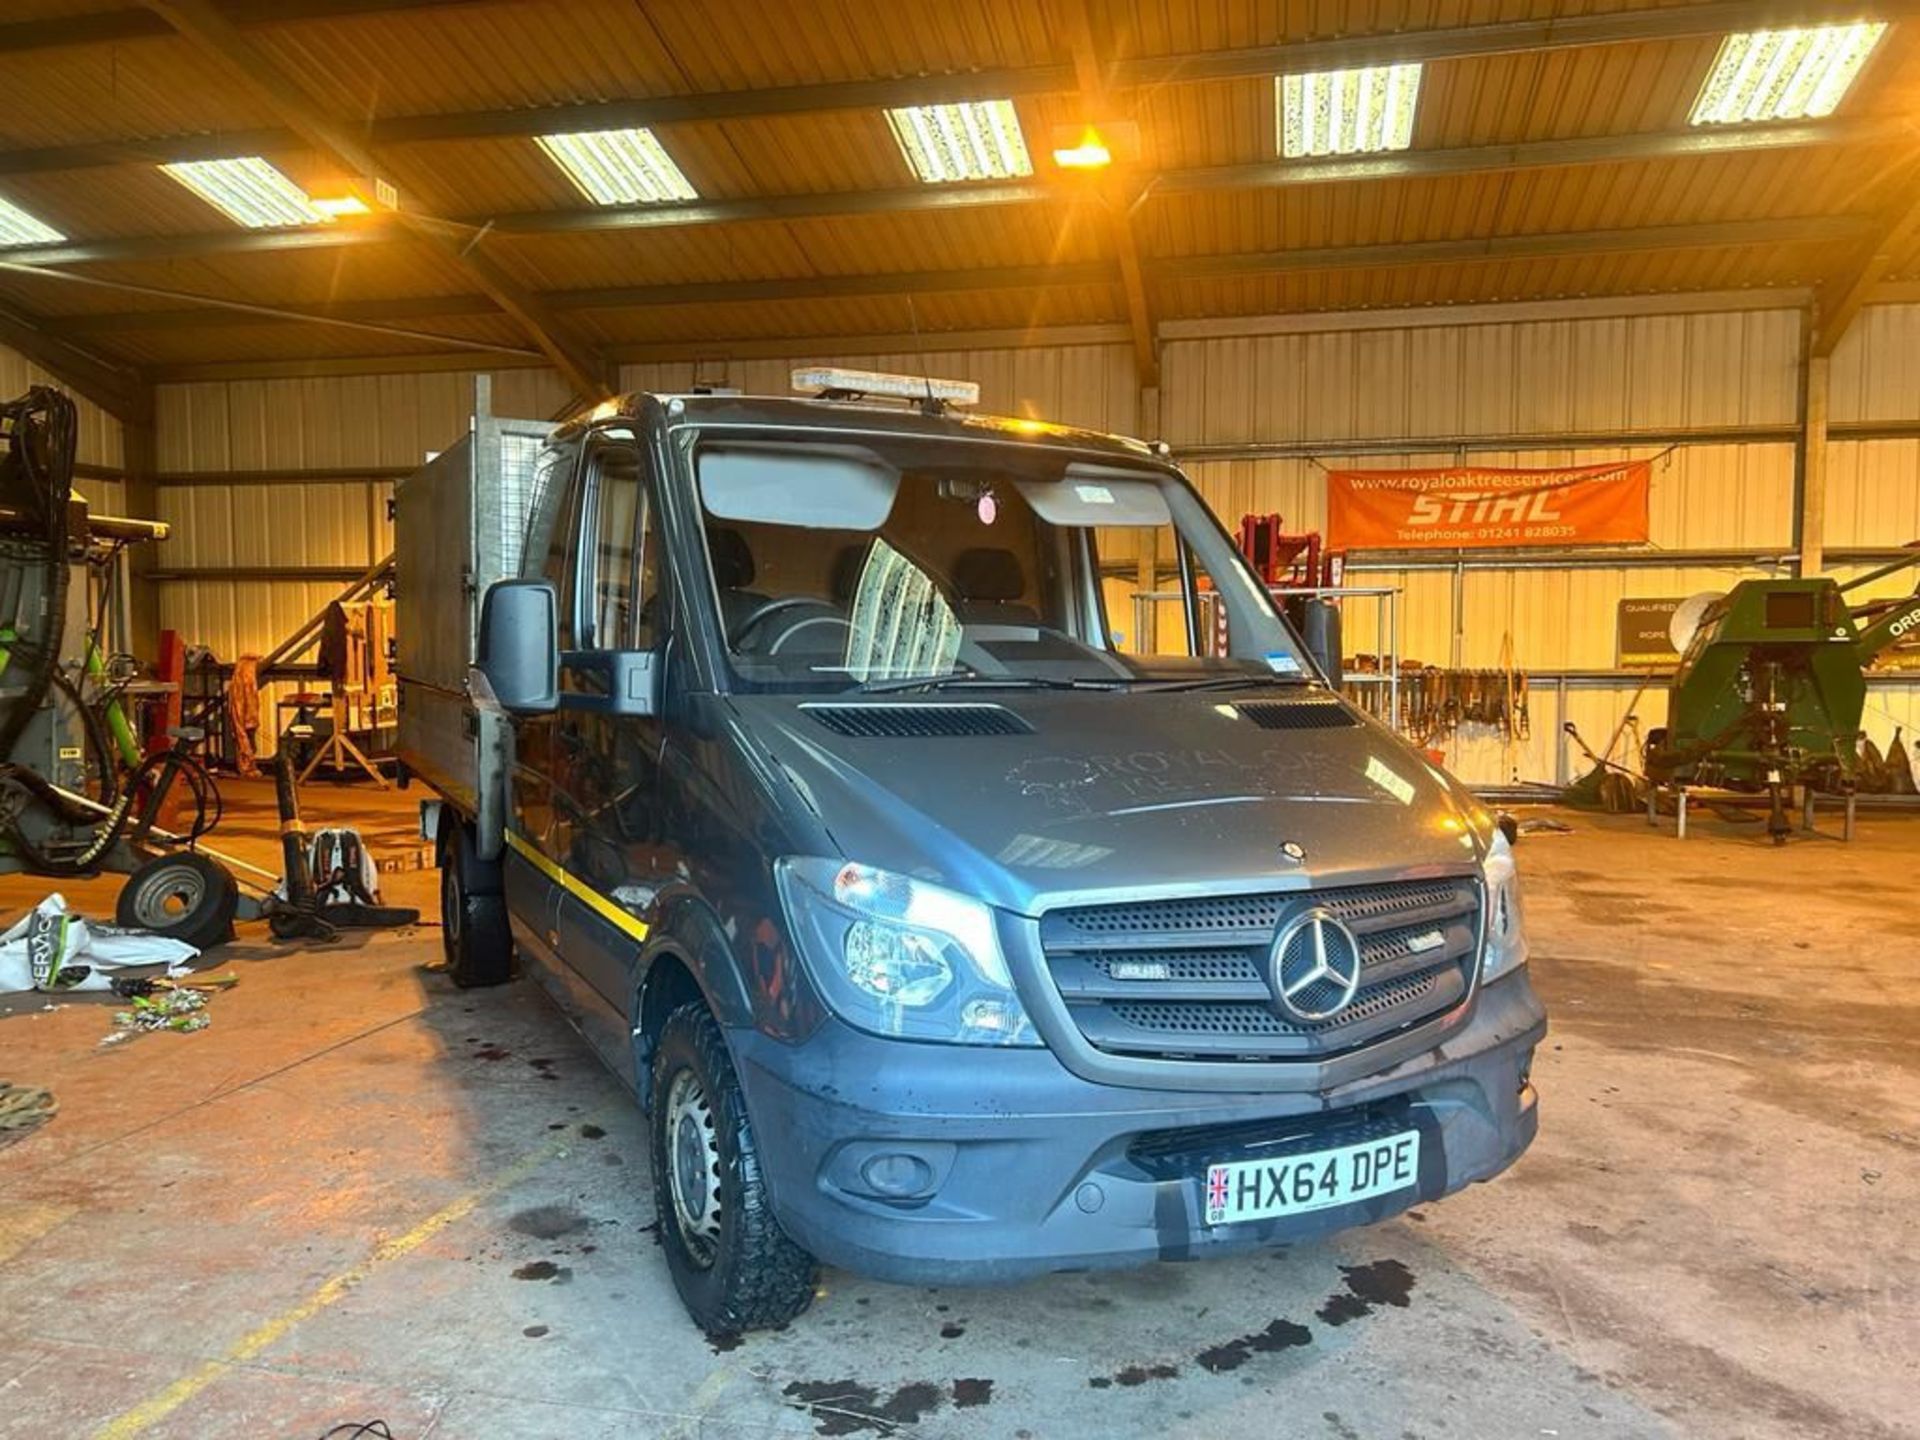 2014 64 MERCEDES SPRINTER DOUBLE CAB ARB TIPPER - WRAPPED IN GREY - LOW 64K MILES